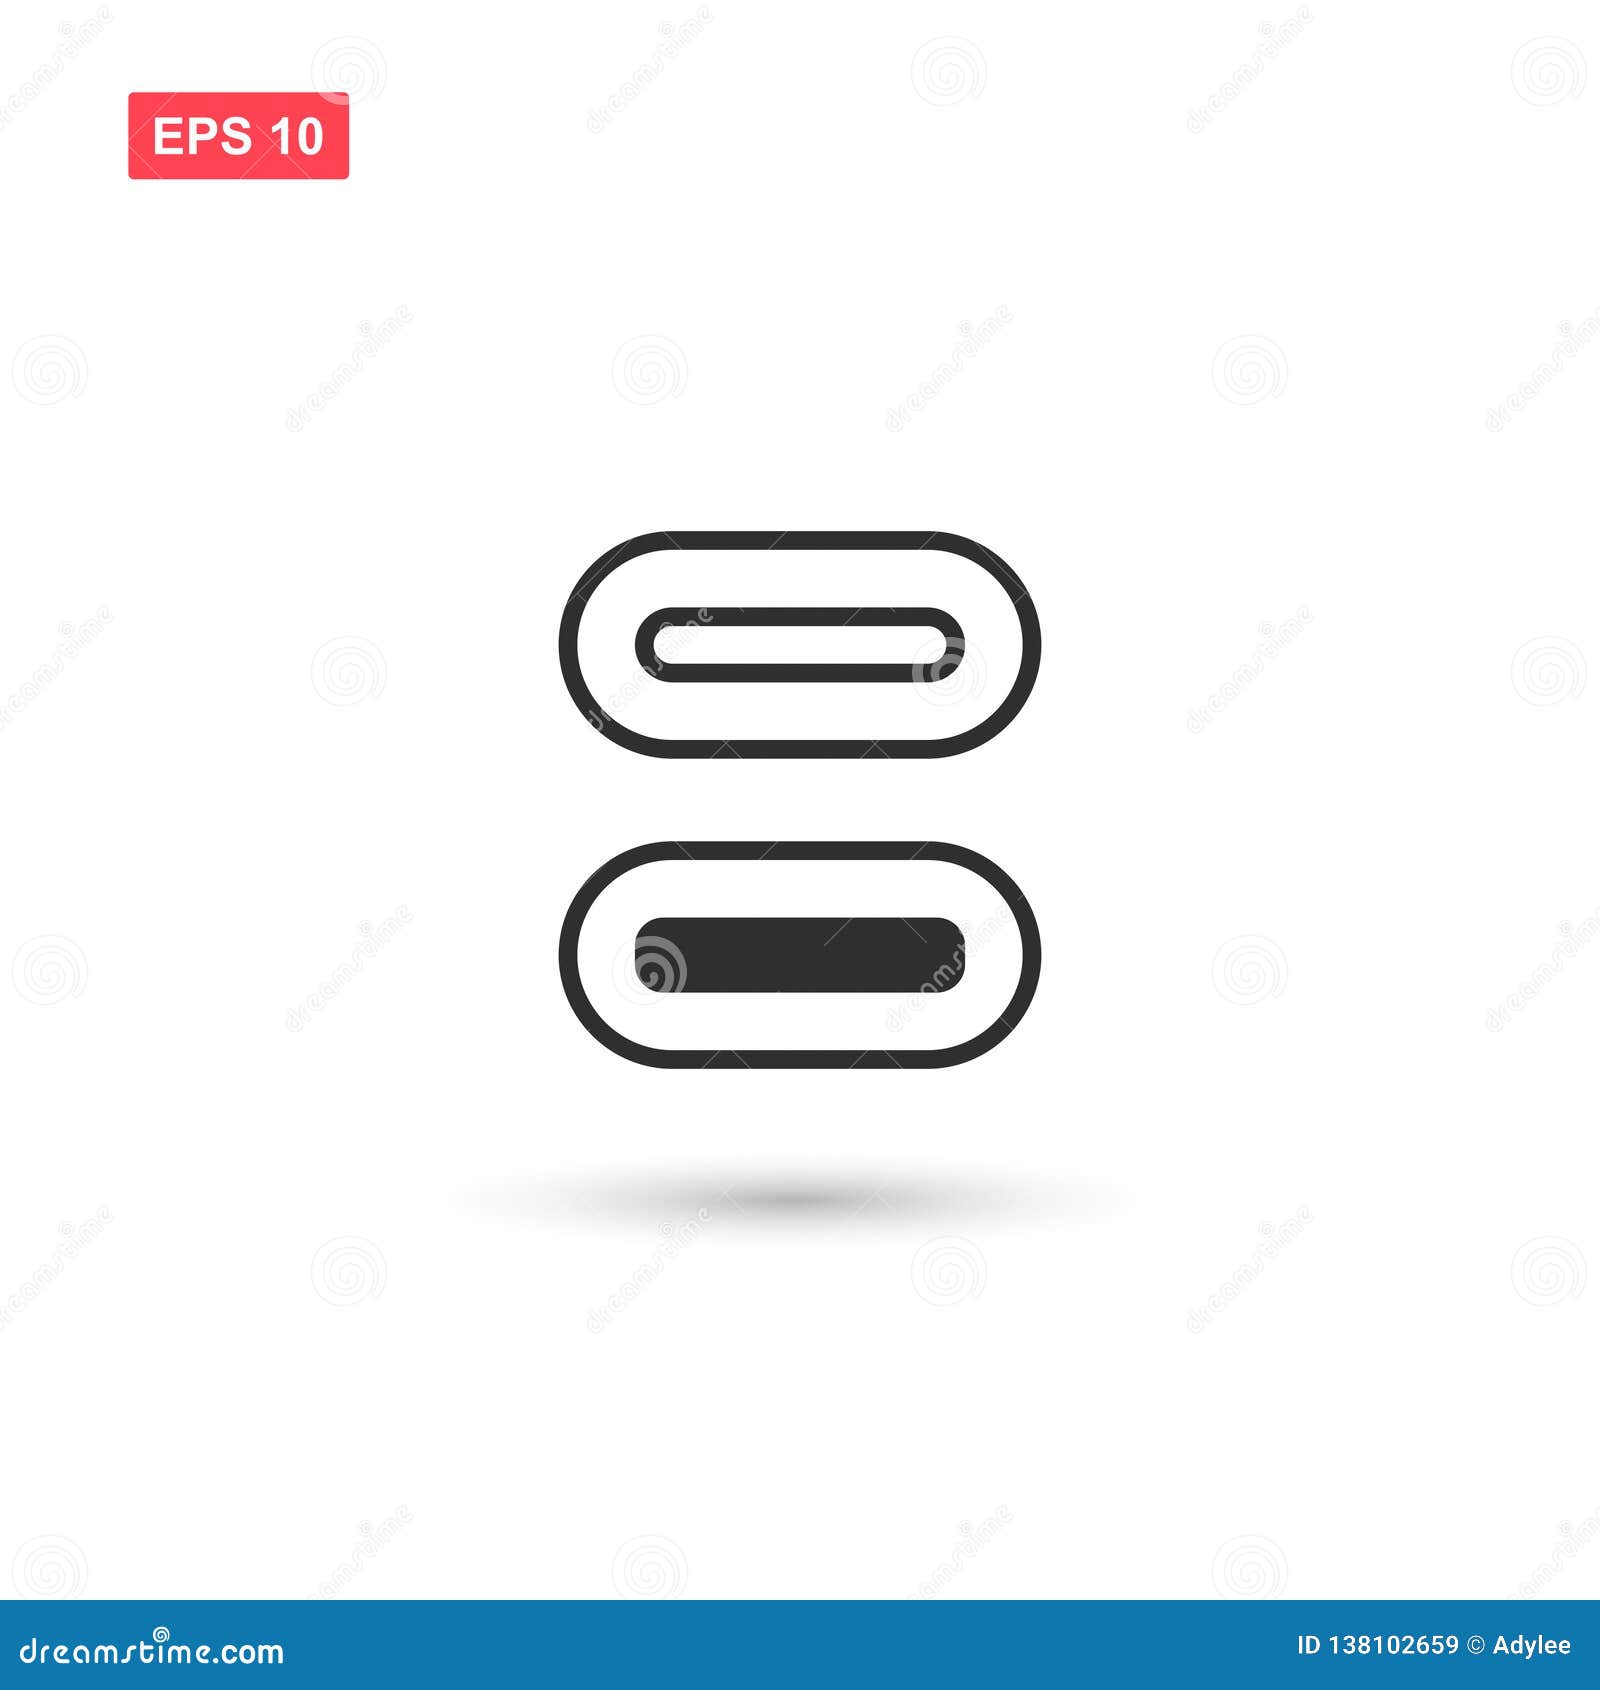 Type C Icon Vector Design Isolated Stock Vector - Illustration of pictogram, connection: 138102659